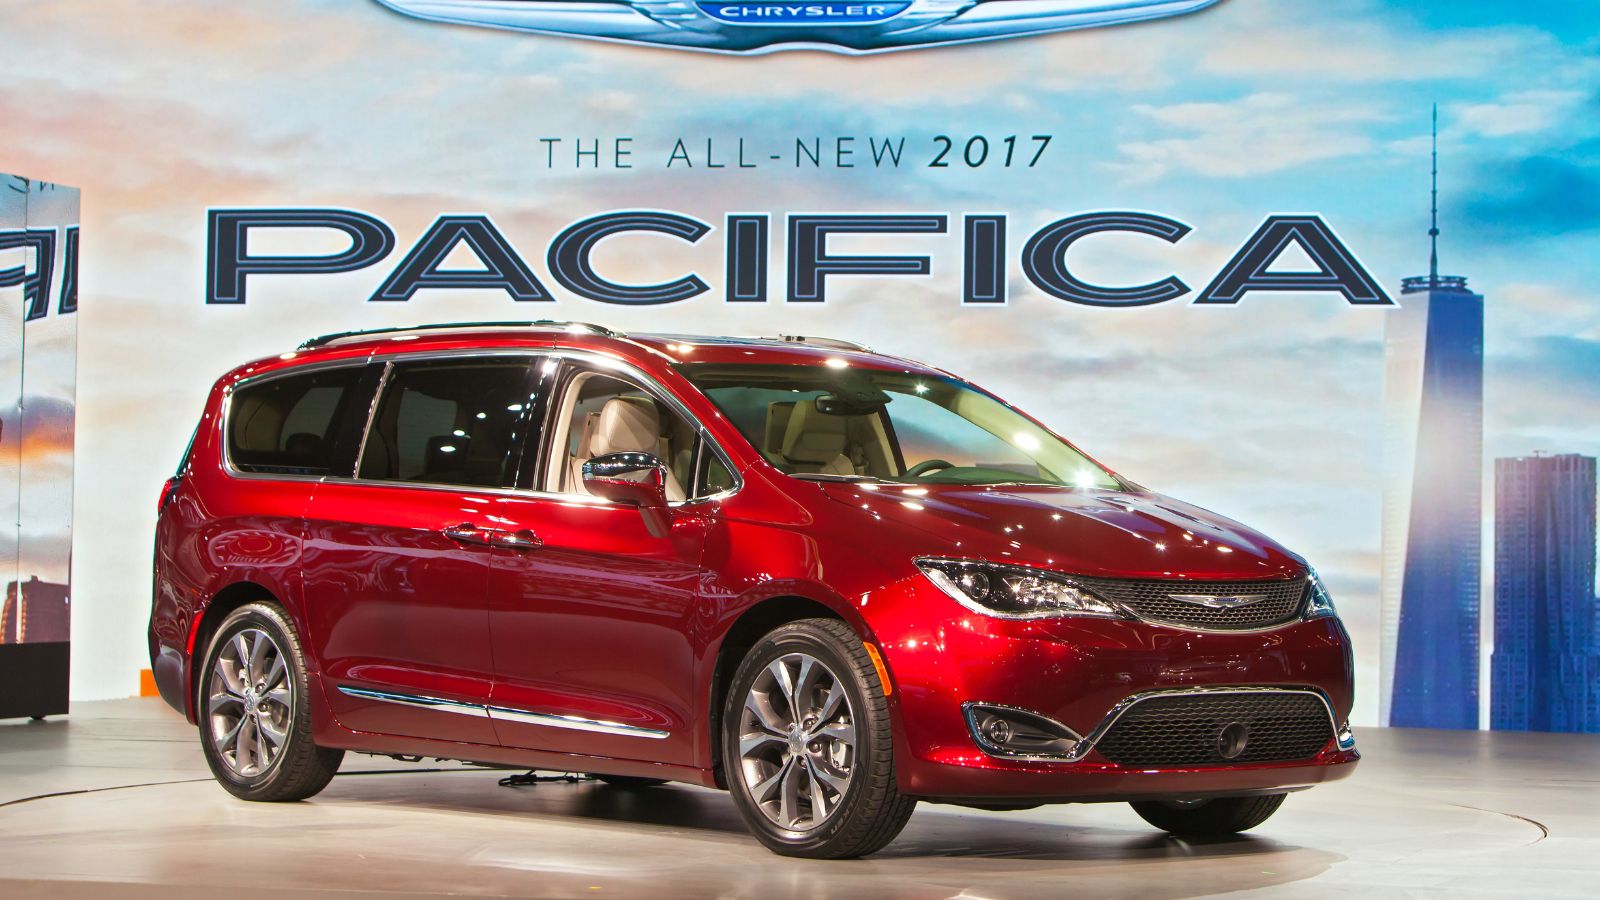 <p>Although Pacificas, in general, rate 71/100 (average) for reliability, <a href="https://www.vehiclehistory.com/report/chrysler/pacifica/2017">Vehicle History</a> doesn’t recommend the 2017 model due to its multiple known mechanical issues. While comfortable and feature-packed, choose a minivan from an alternative year, or else you may encounter expensive transmission, electrical, and infotainment issues.</p>